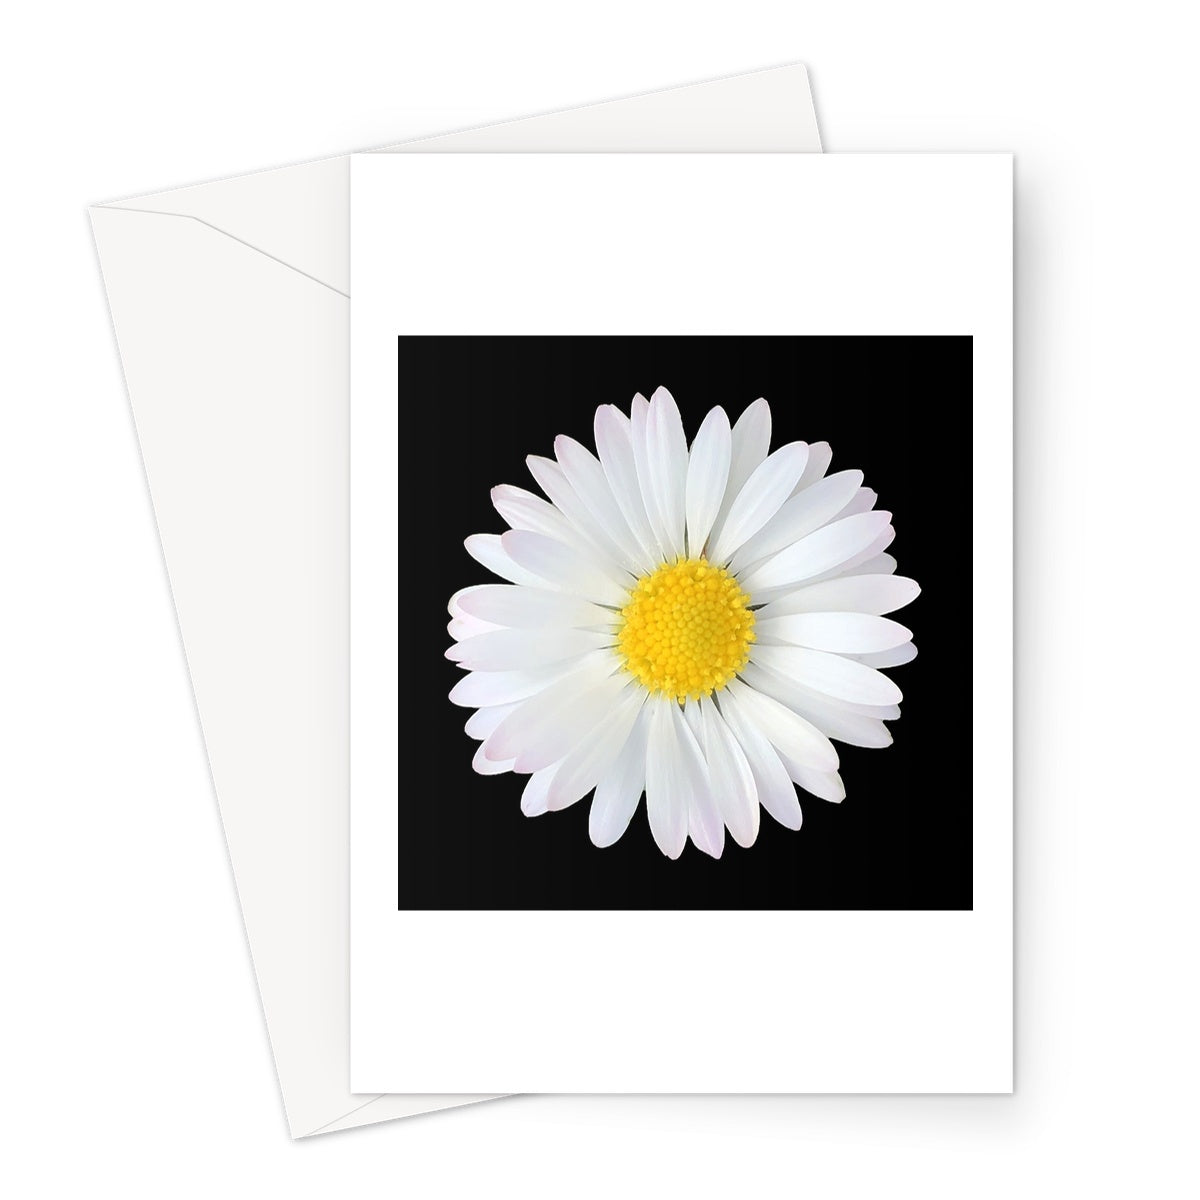 Daisy Print Greeting Card - Nature of Flowers